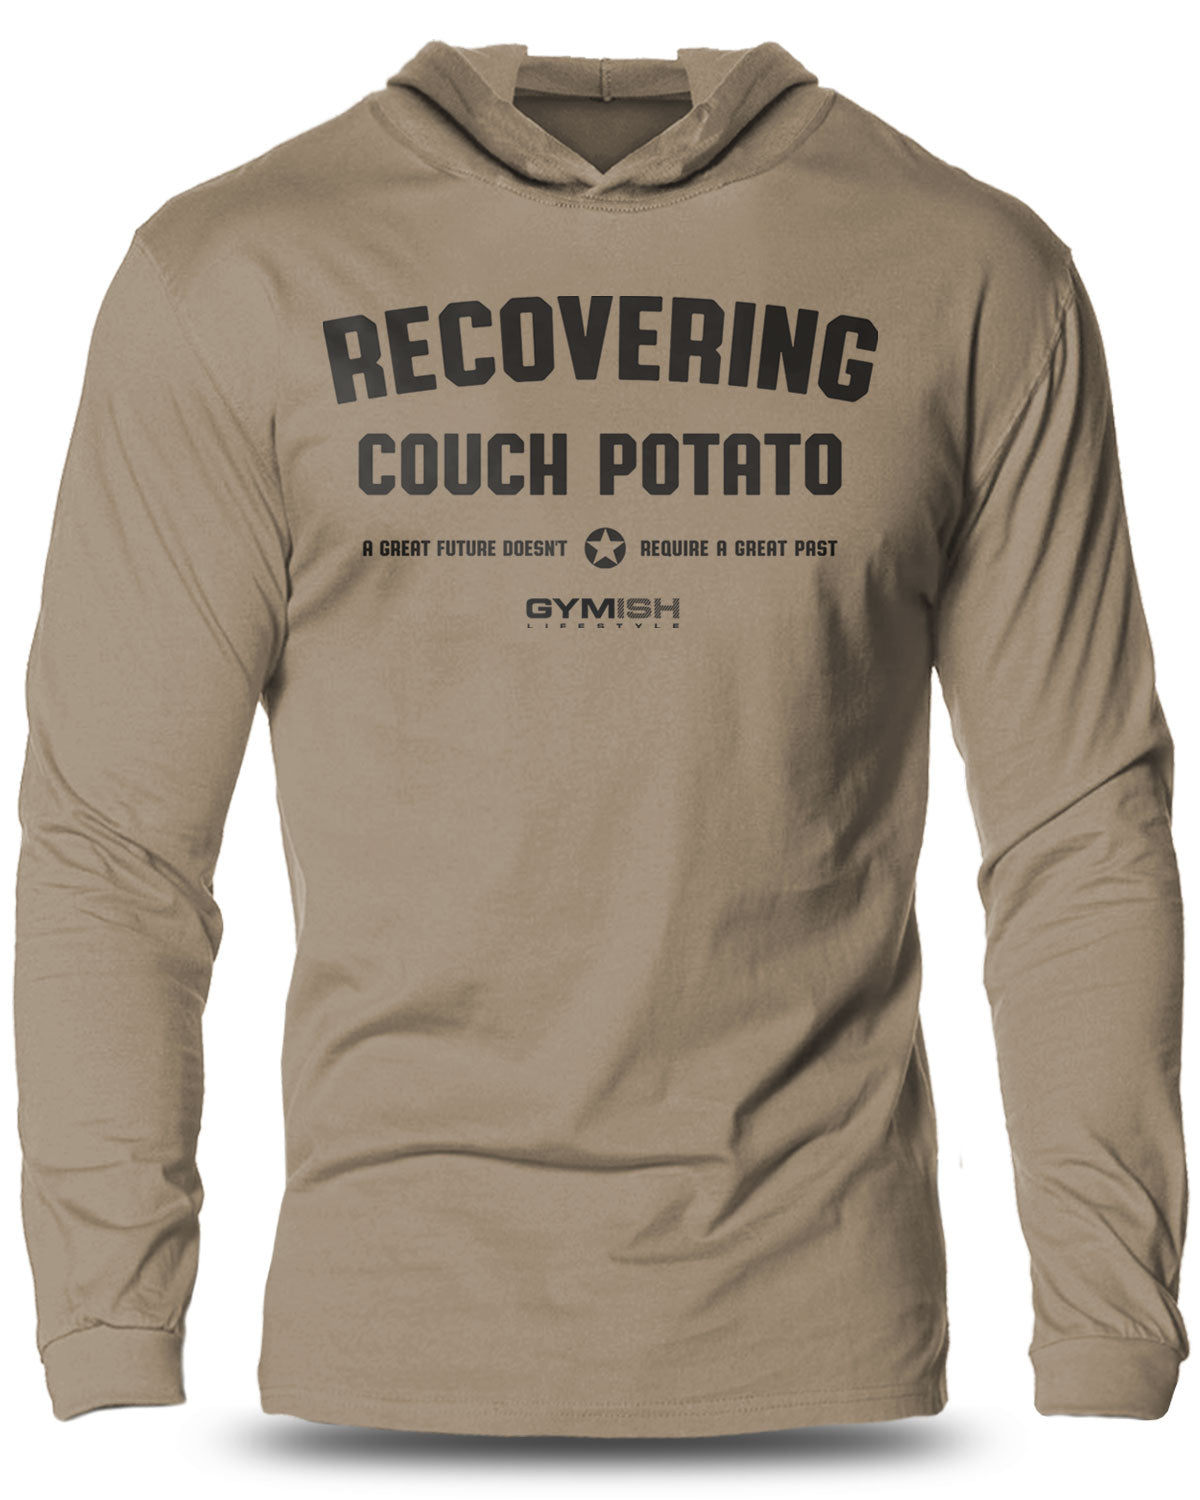 030- Recovering Couch Potato Lightweight Long Sleeve Hooded T-shirt for Men